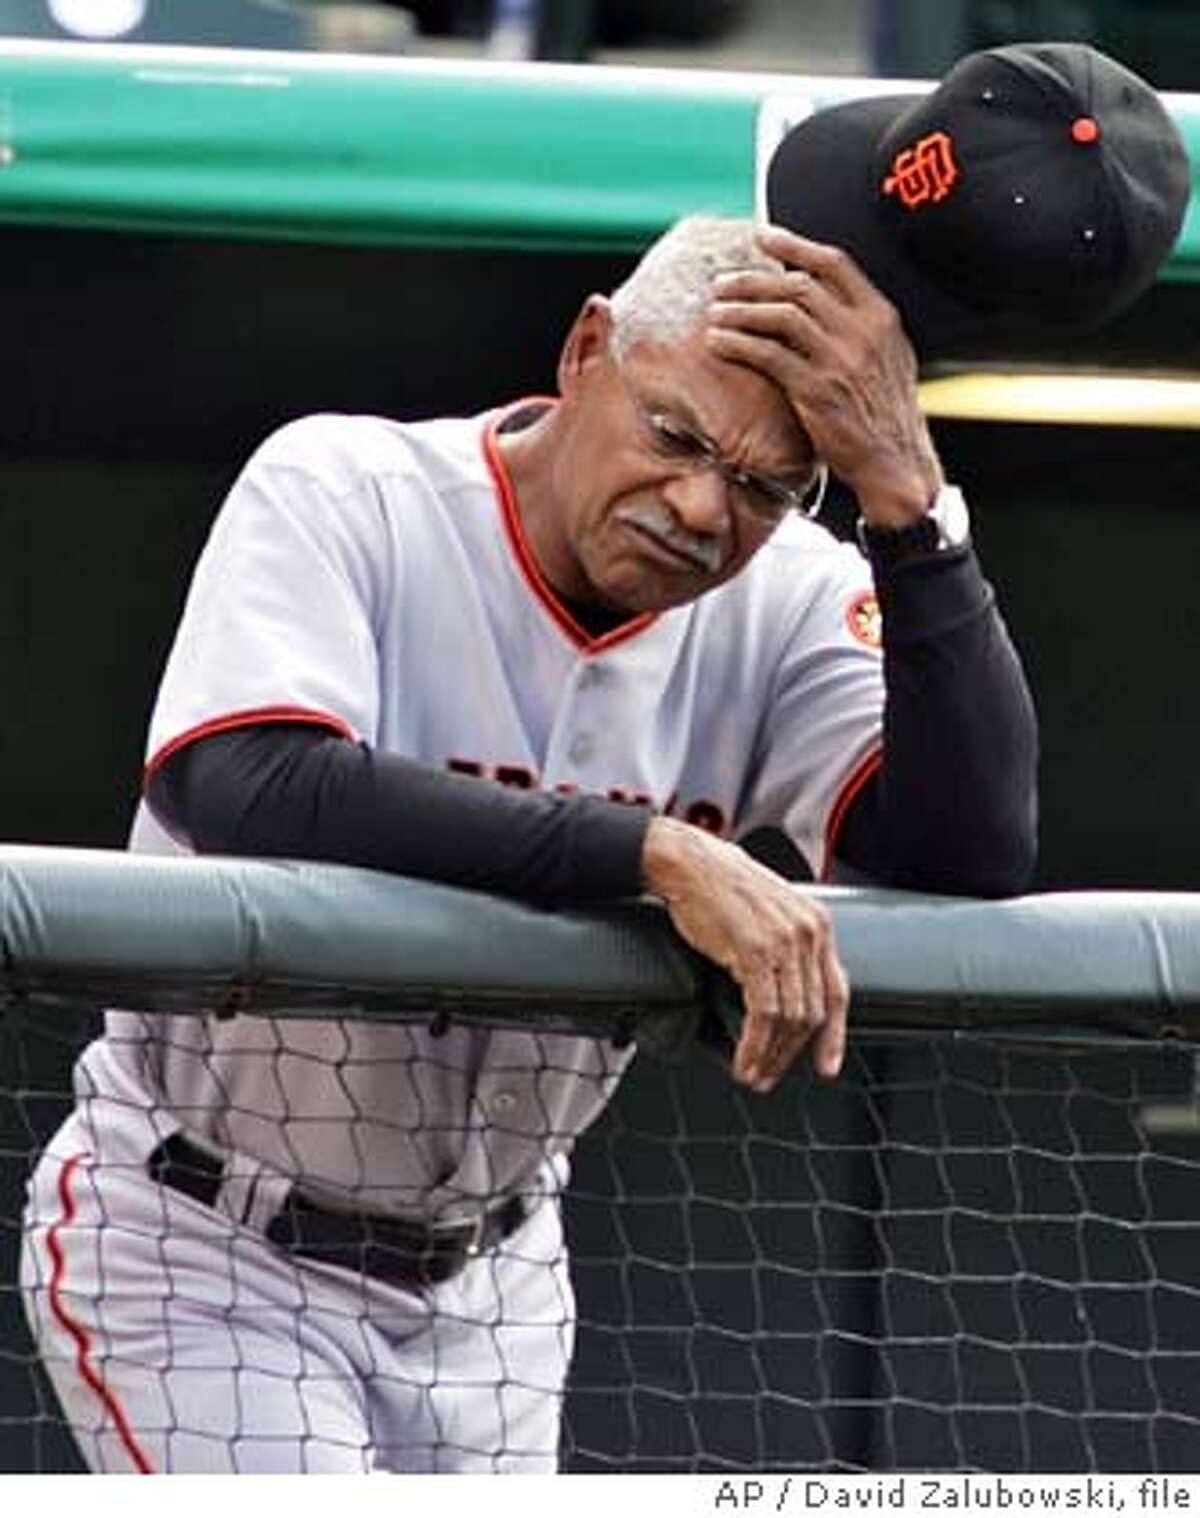 ** FILE ** San Francisco Giants manager Felipe Alou holds his head as he leans over the rail while looking on as pitcher Brad Hennessey falls behind in the count to Colorado Rockies' Todd Helton in a baseball game in Denver on May 18, 2005. Alou plans to fly home to Florida and then the Dominican Republic as soon as the season ends, even if his future with the Giants has yet to be resolved. (AP Photo/David Zalubowski, file)